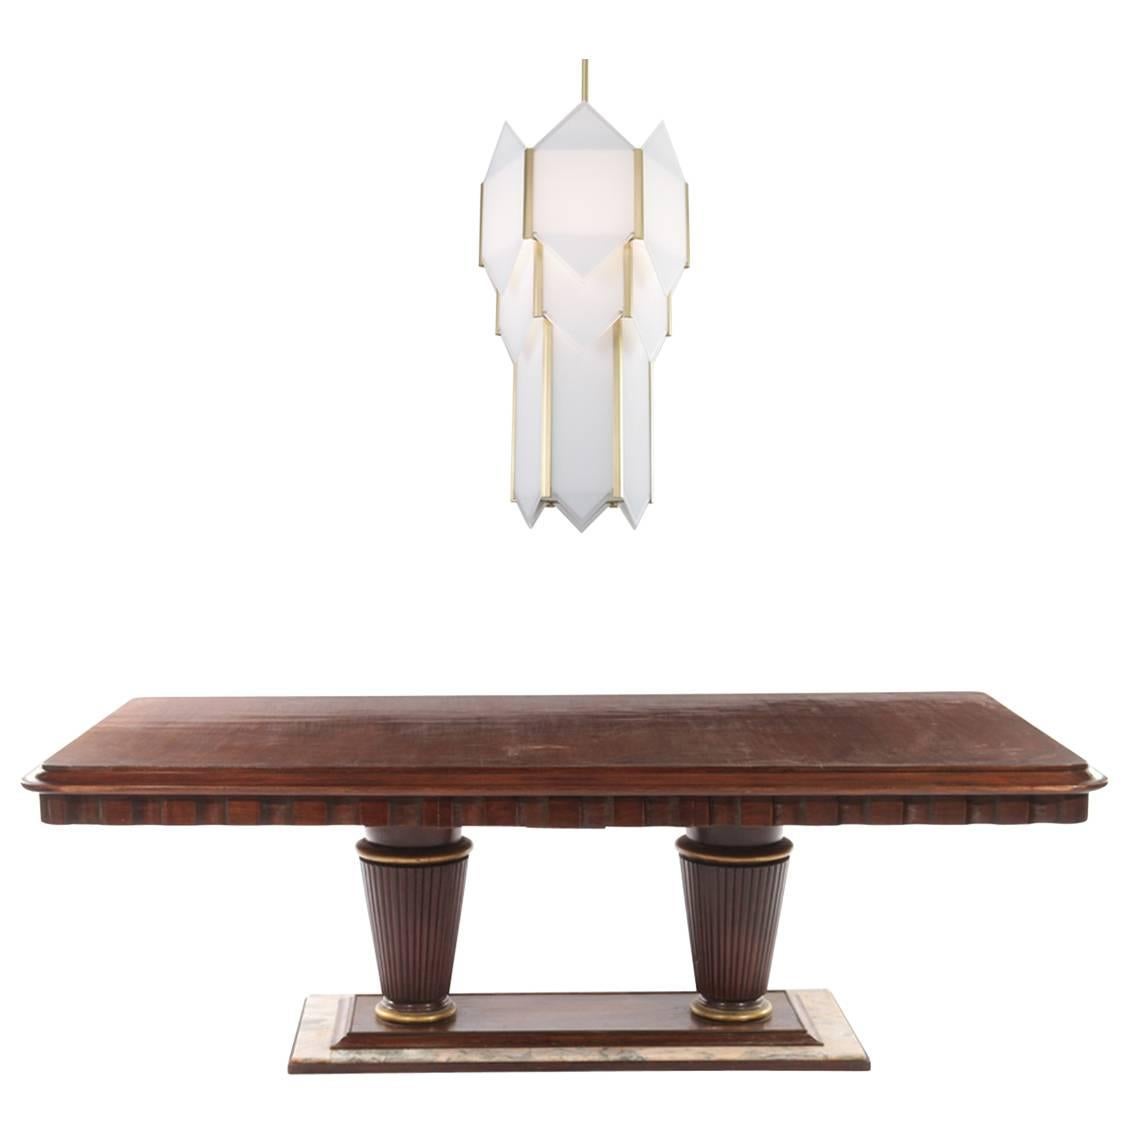 Mahogany and Marble Art Deco Dining Room Table with Skyscraper Chandelier For Sale